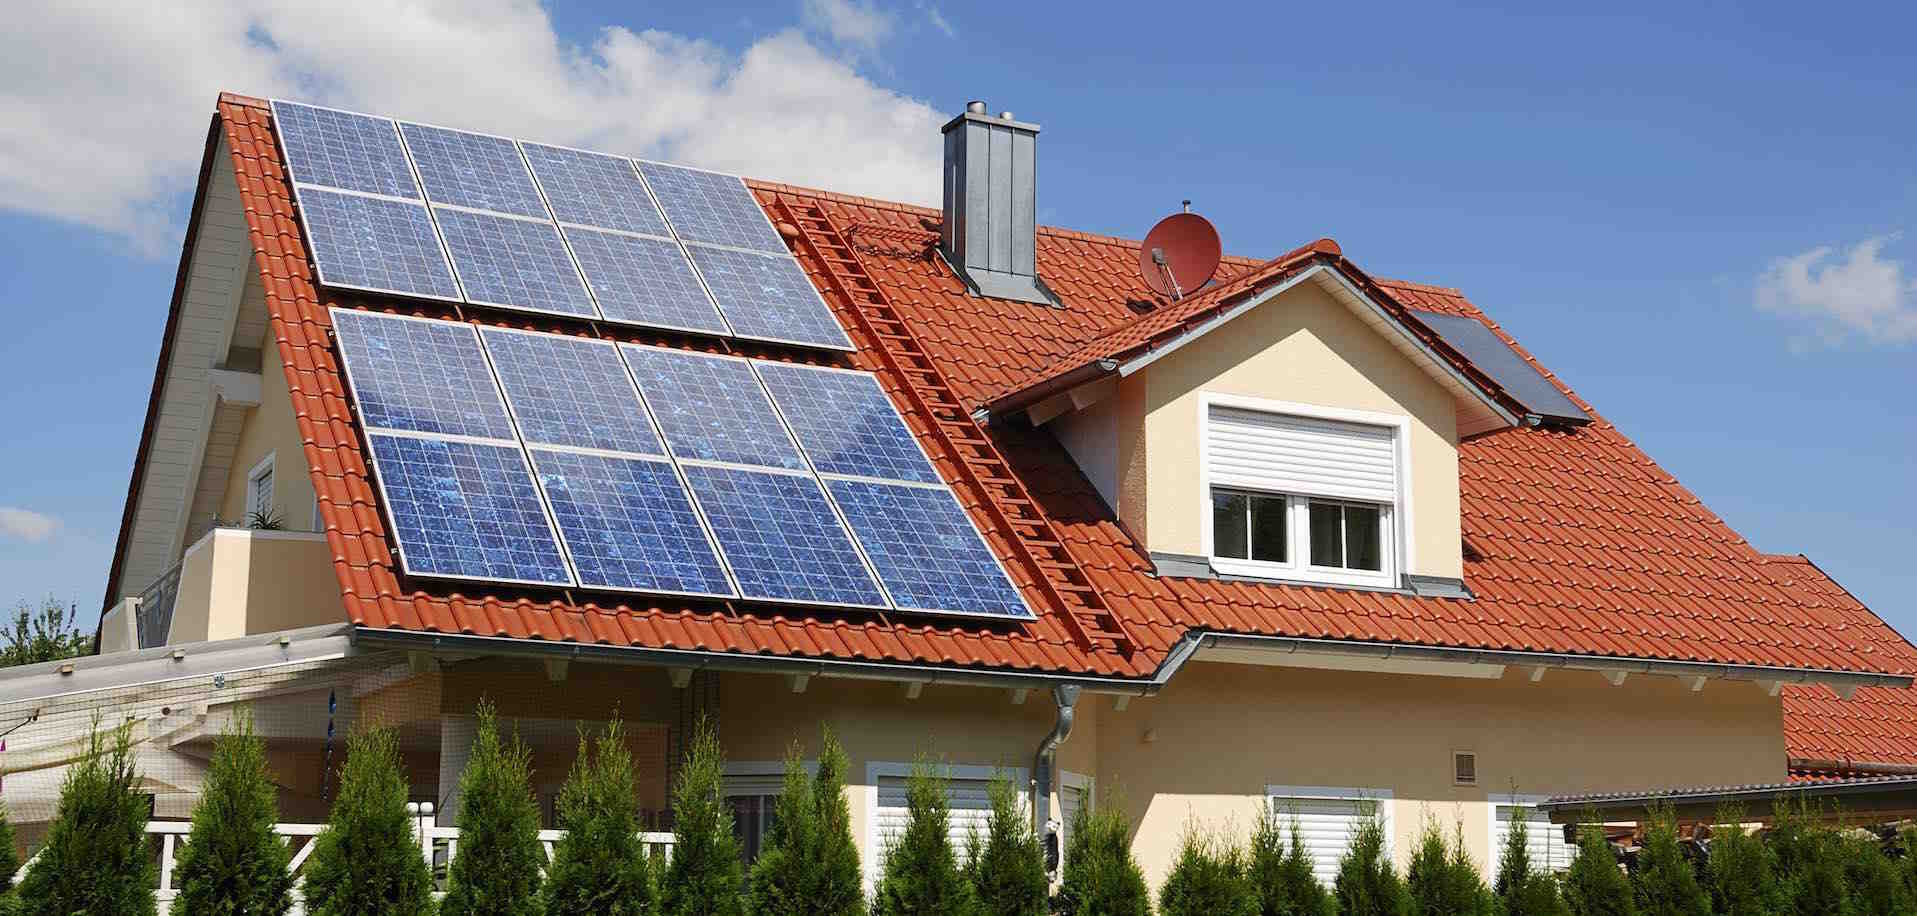 How much does it cost to clean solar panels?